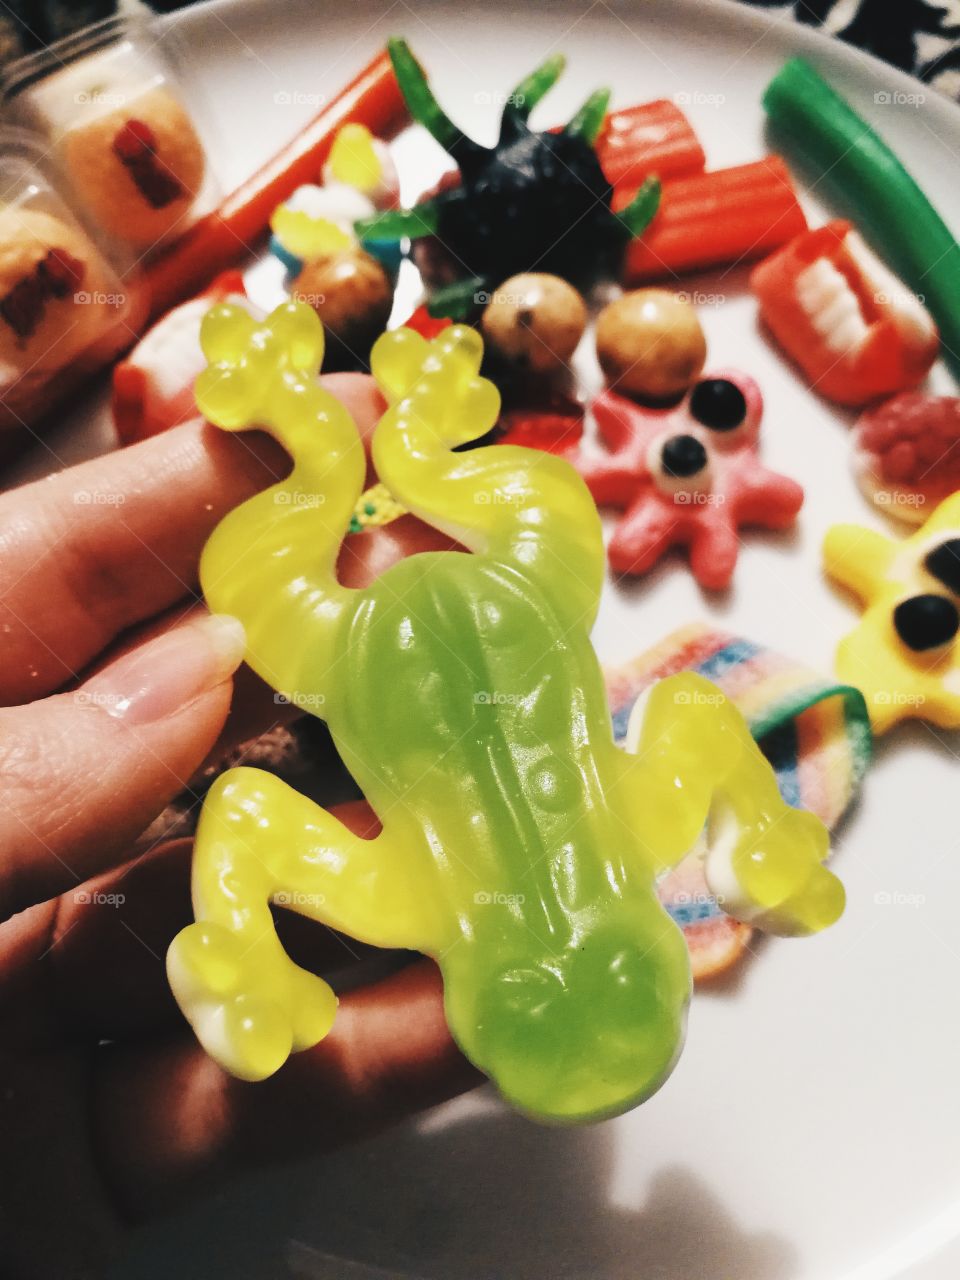 Hand holding frog shaped gummi candie